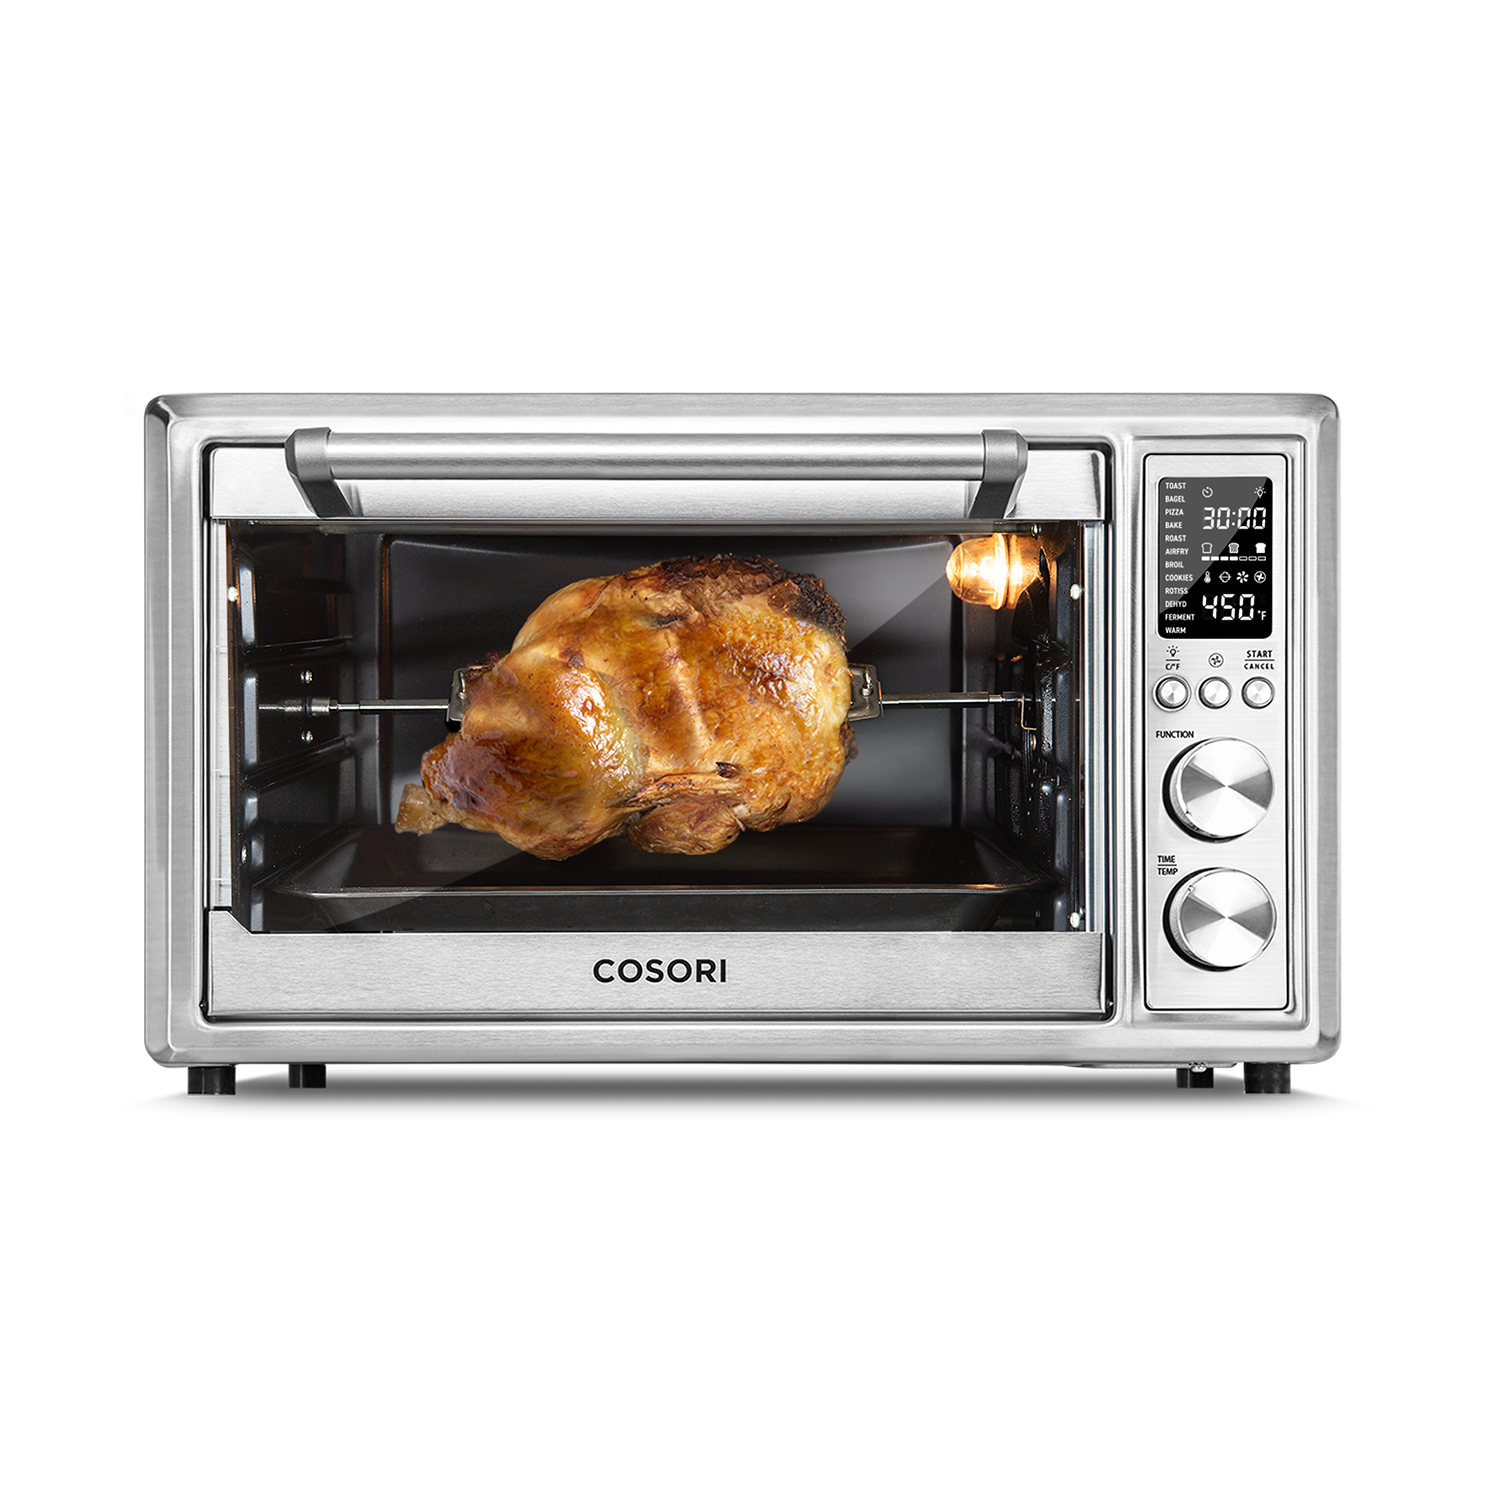 Cosori CO130-AO Air Fryer Toaster Oven Combo 12-in-1 Countertop